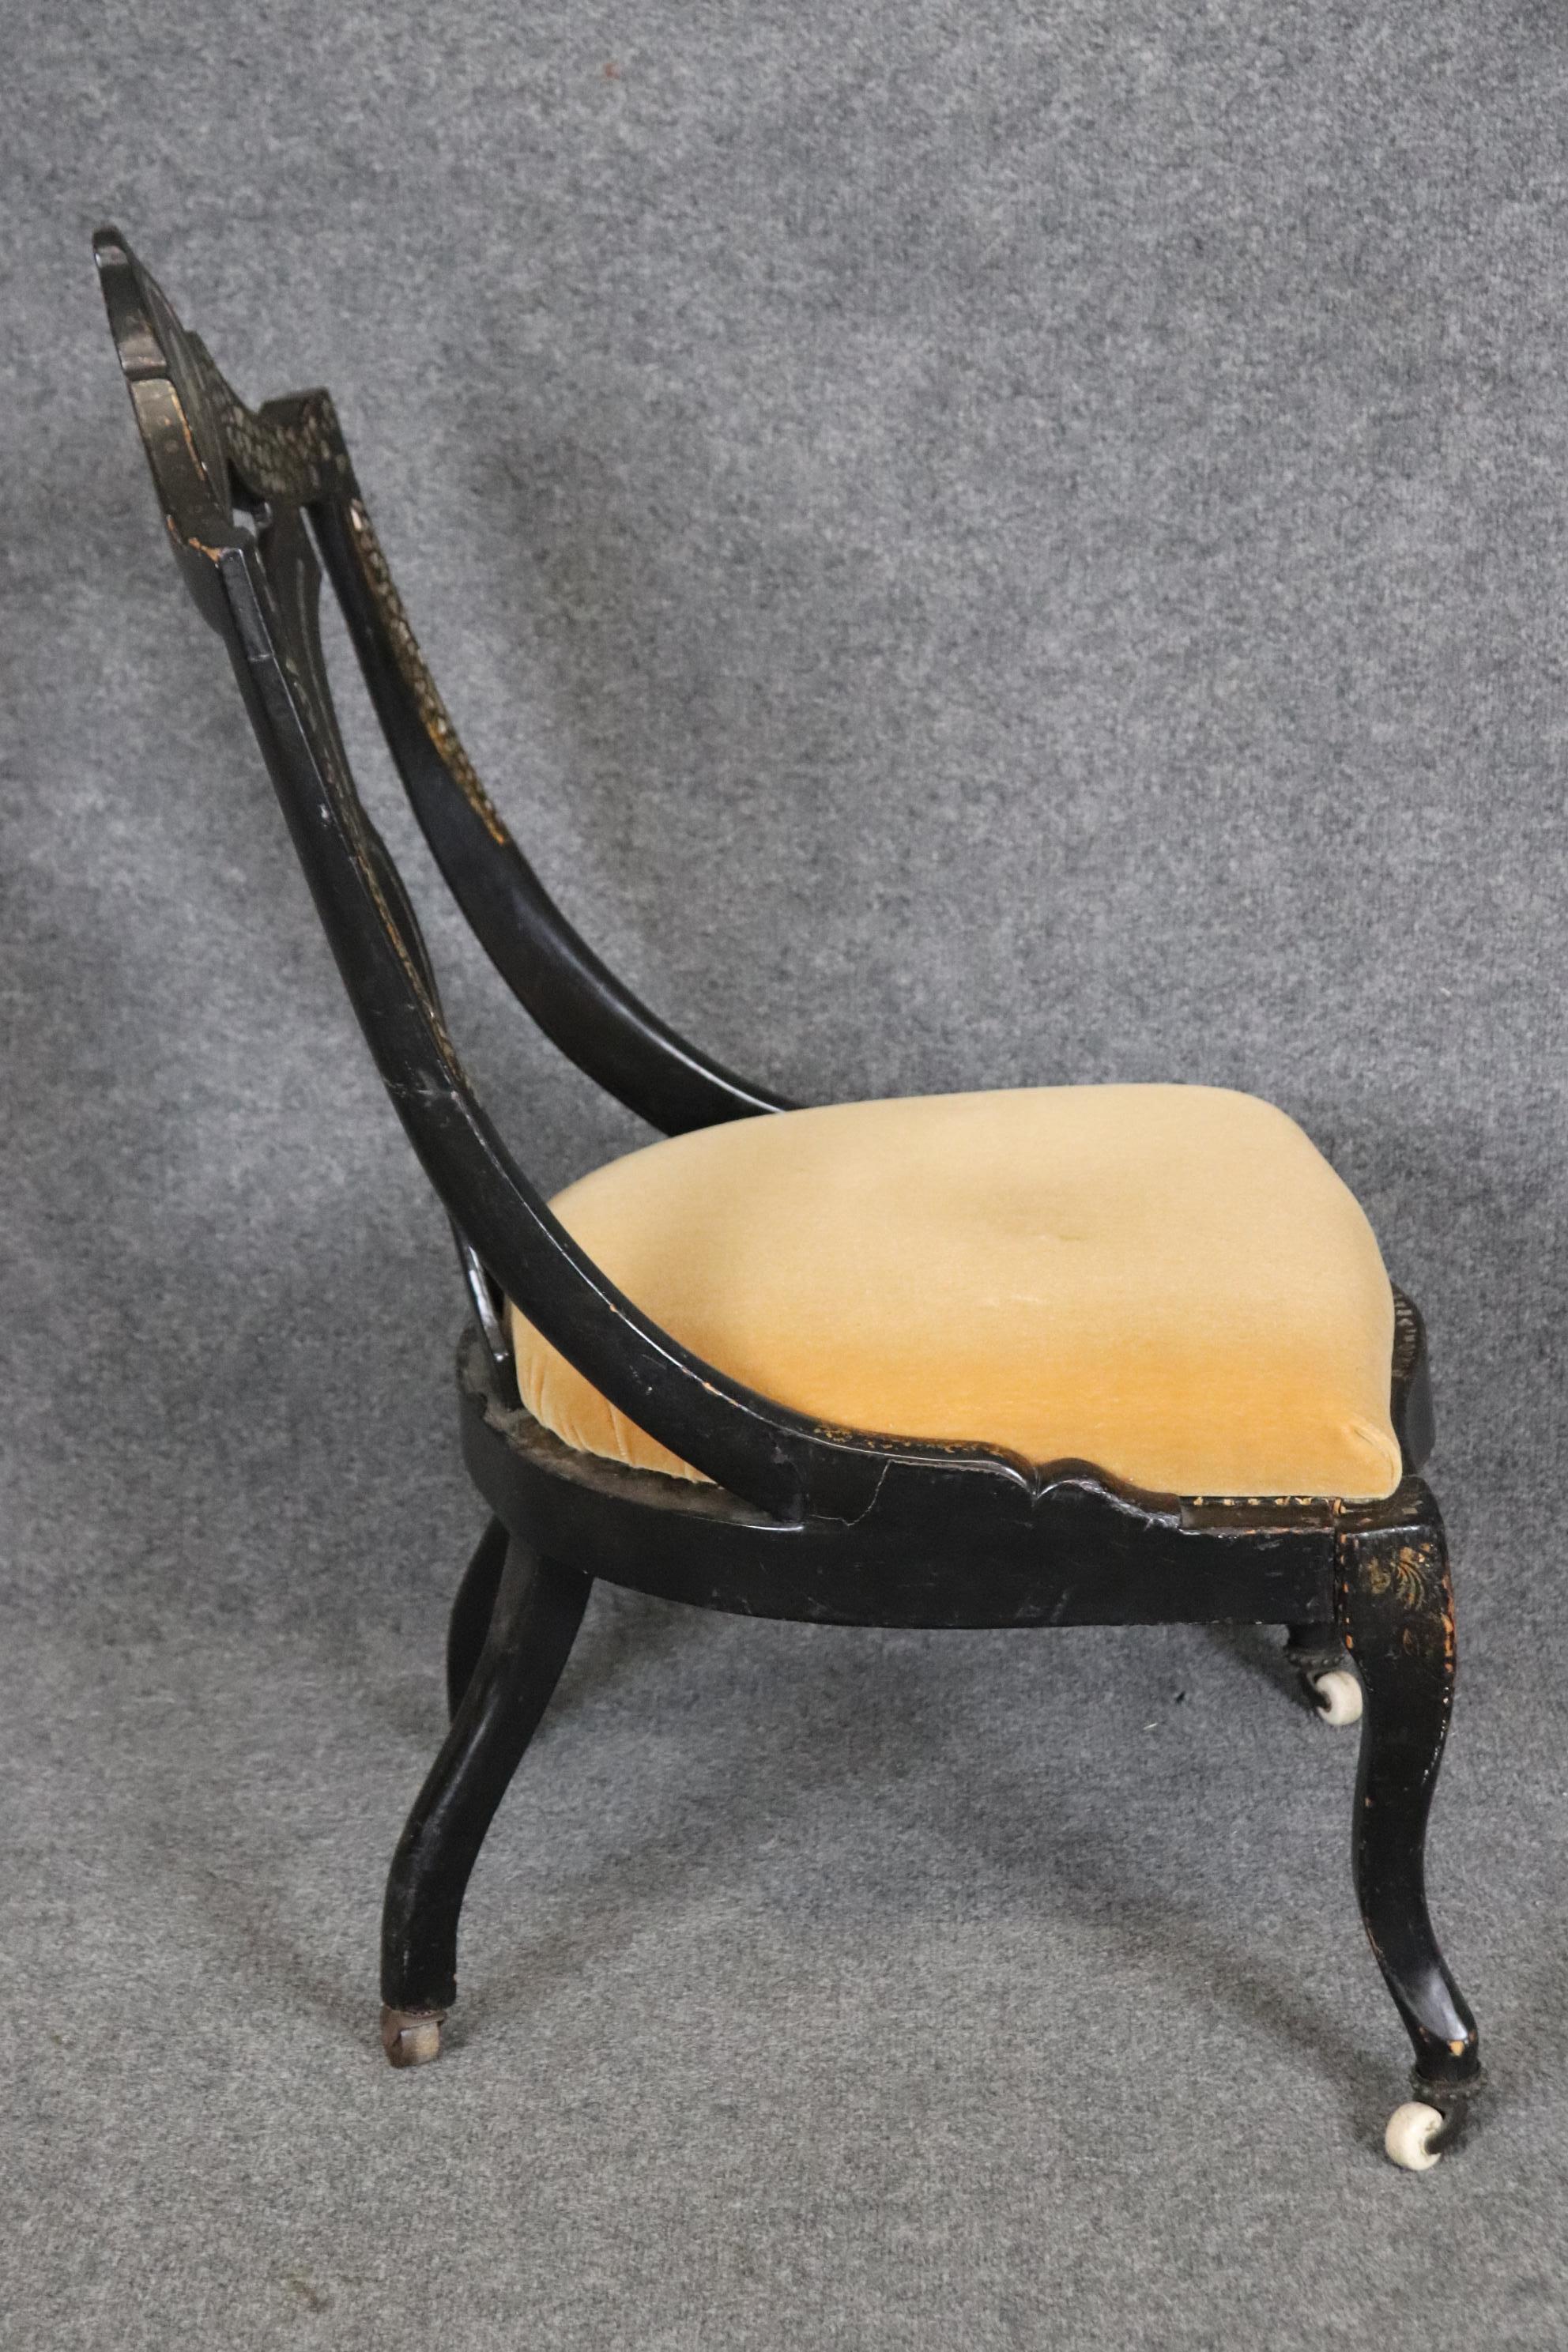 Dimensions - H: 36in W: 20in D: 25in SH: 16in

This Antique 19th Century Victorian Ebonized Mother of Pearl Inlaid Slipper Chair is truly a unique piece! If you look at the photos provided you will see the attention to detail within the inlaid